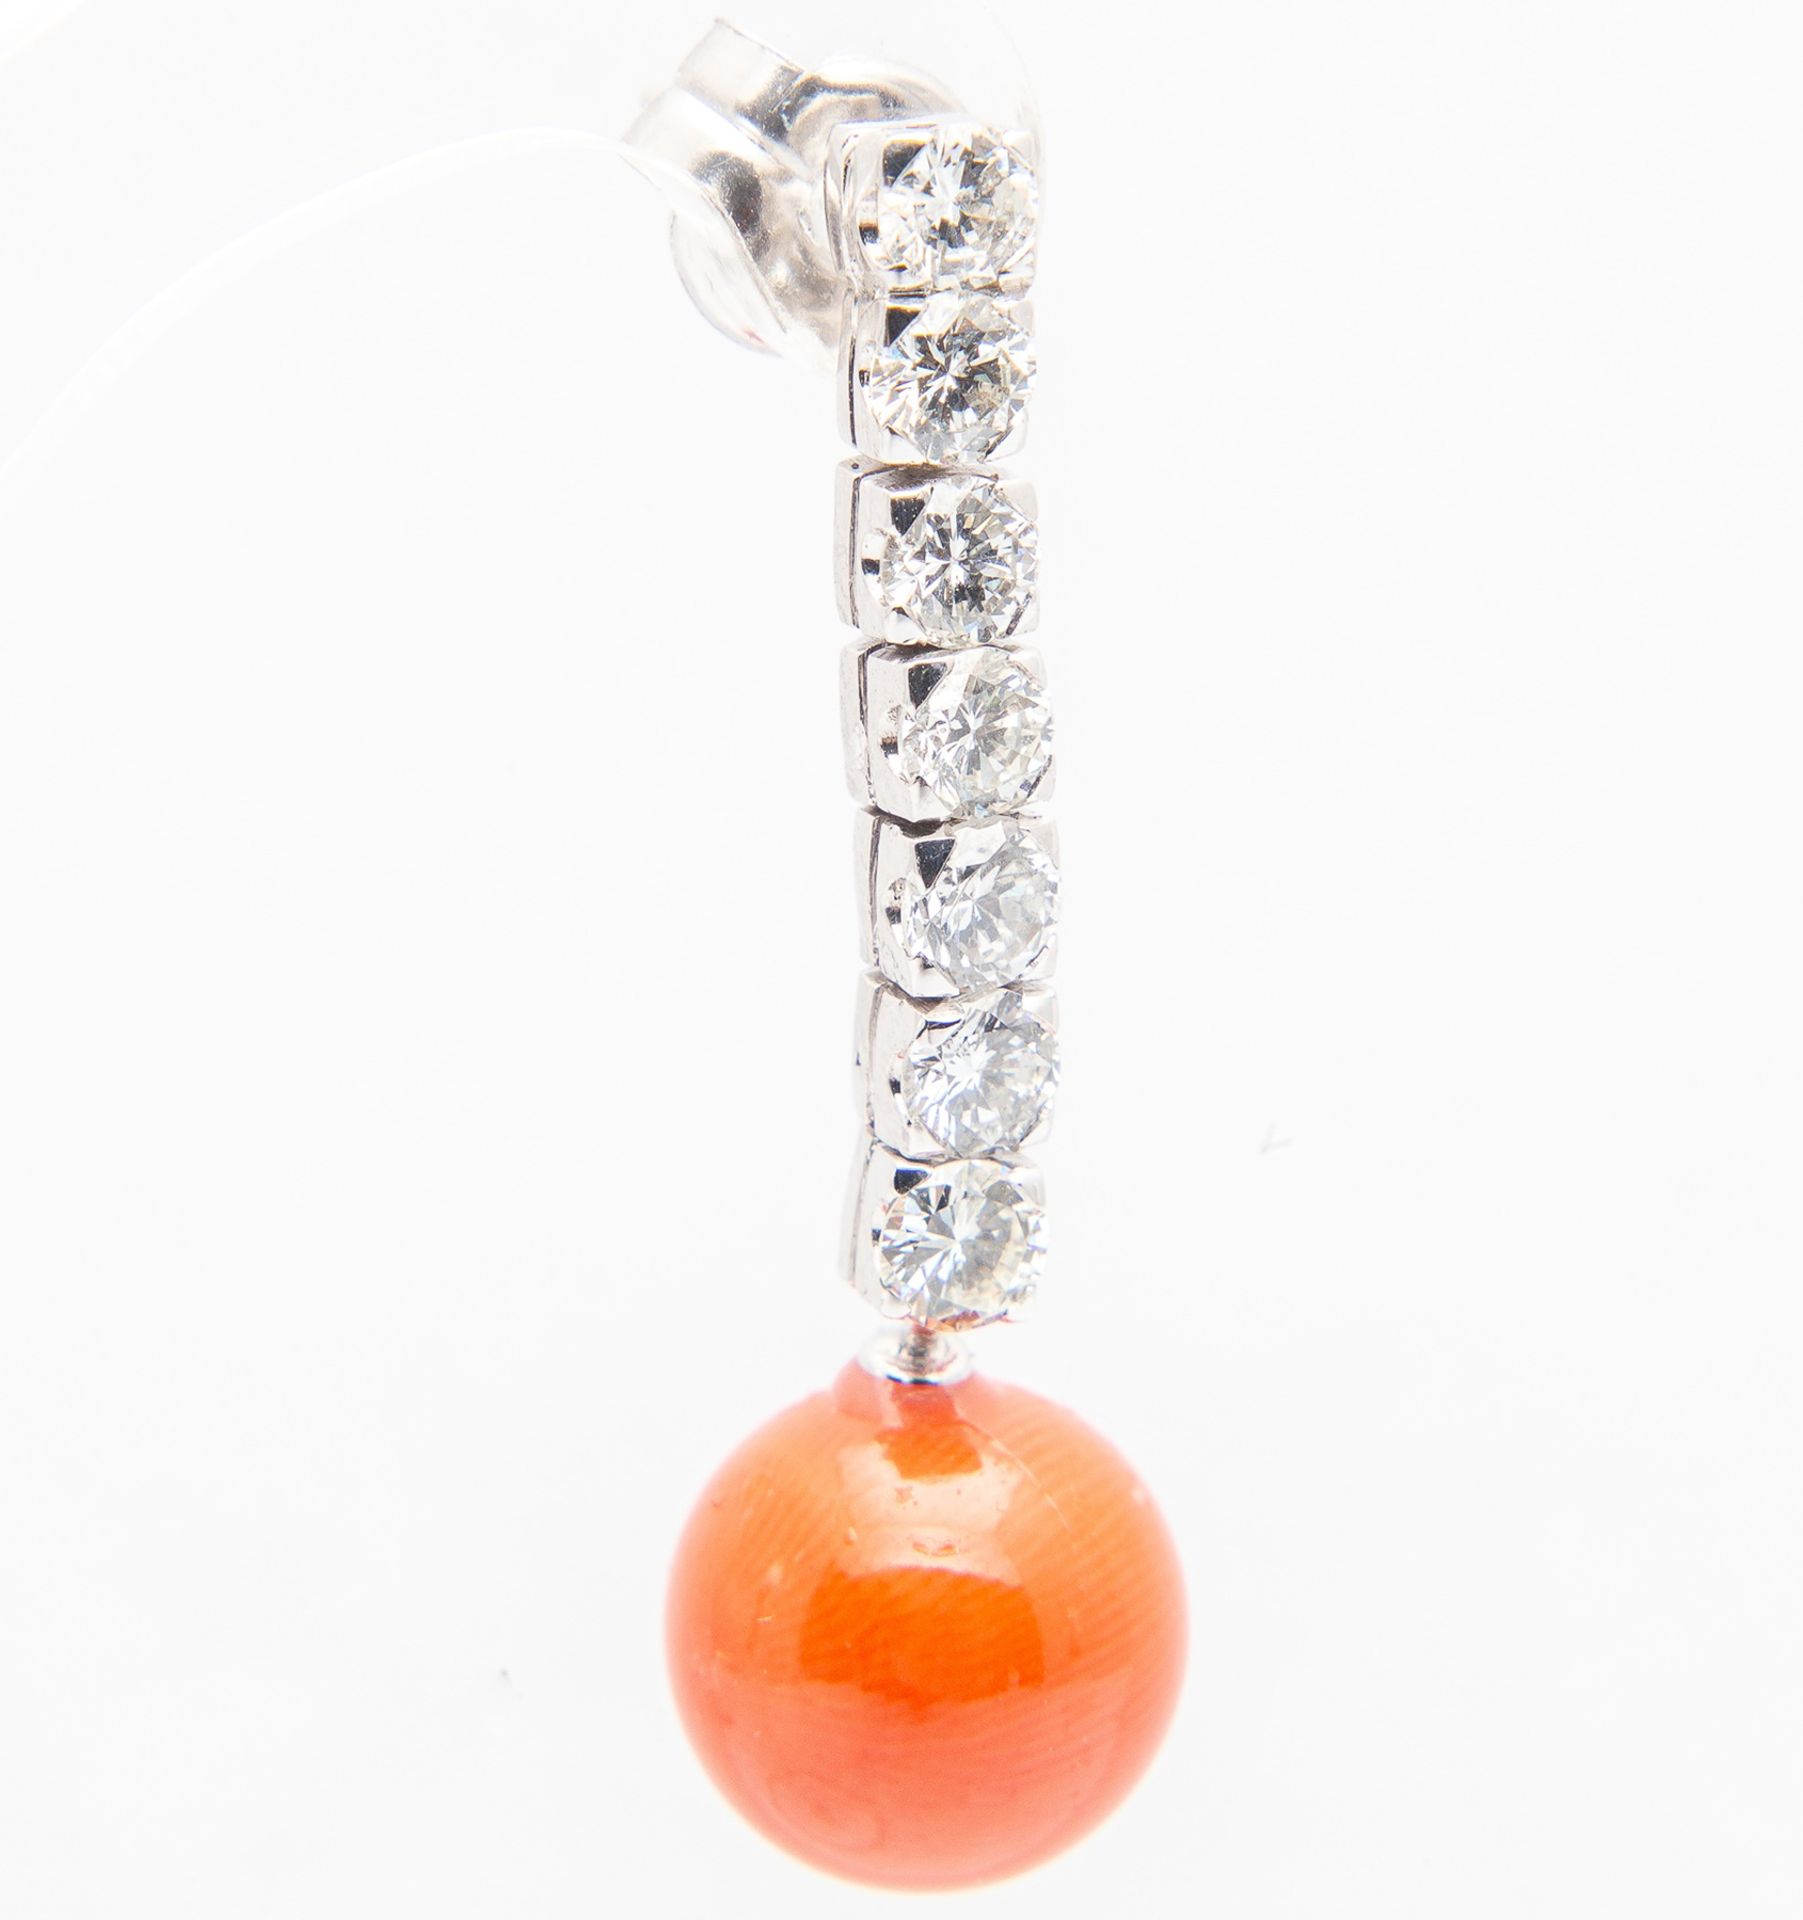 Teardrop earrings in 18k white gold, brilliant cut diamonds and AAA quality Mediterranean red coral - Image 4 of 9